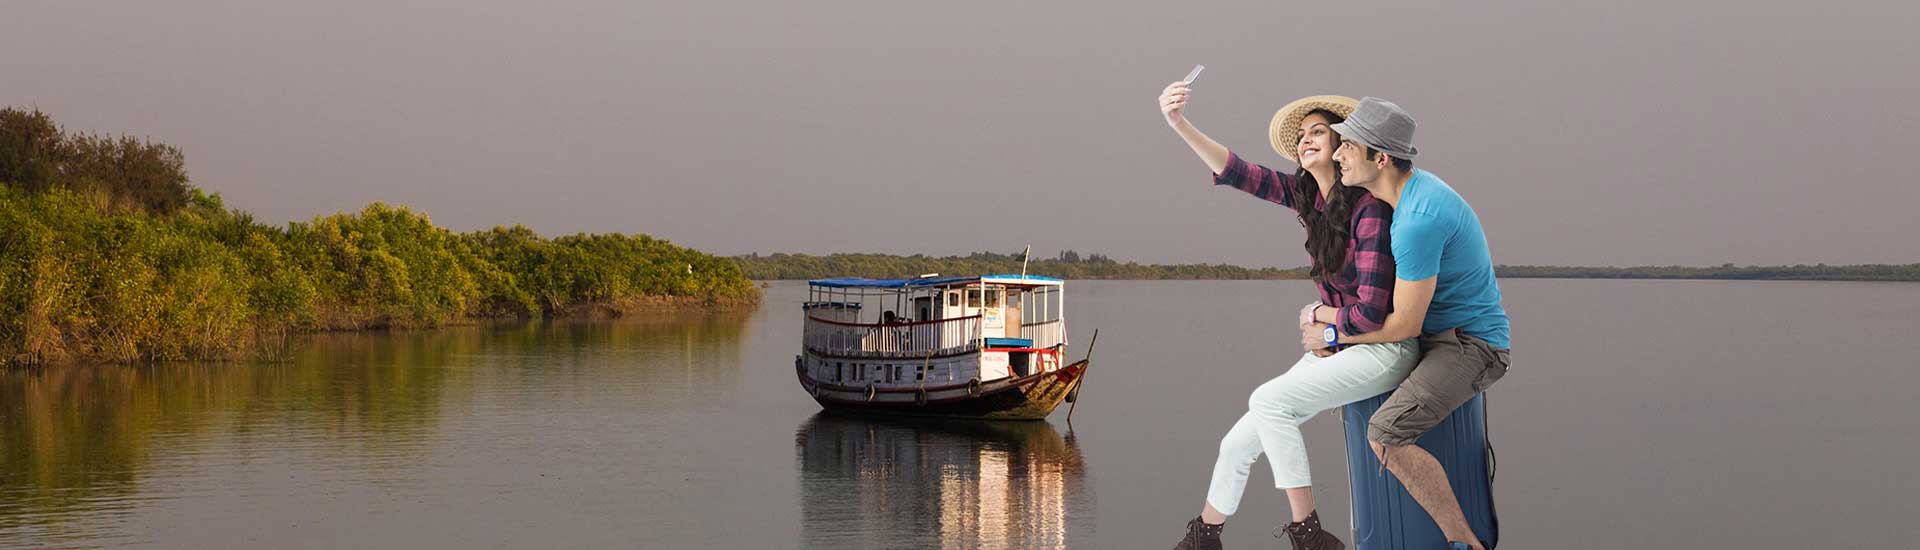 What to Pack While Sundarban Travel?